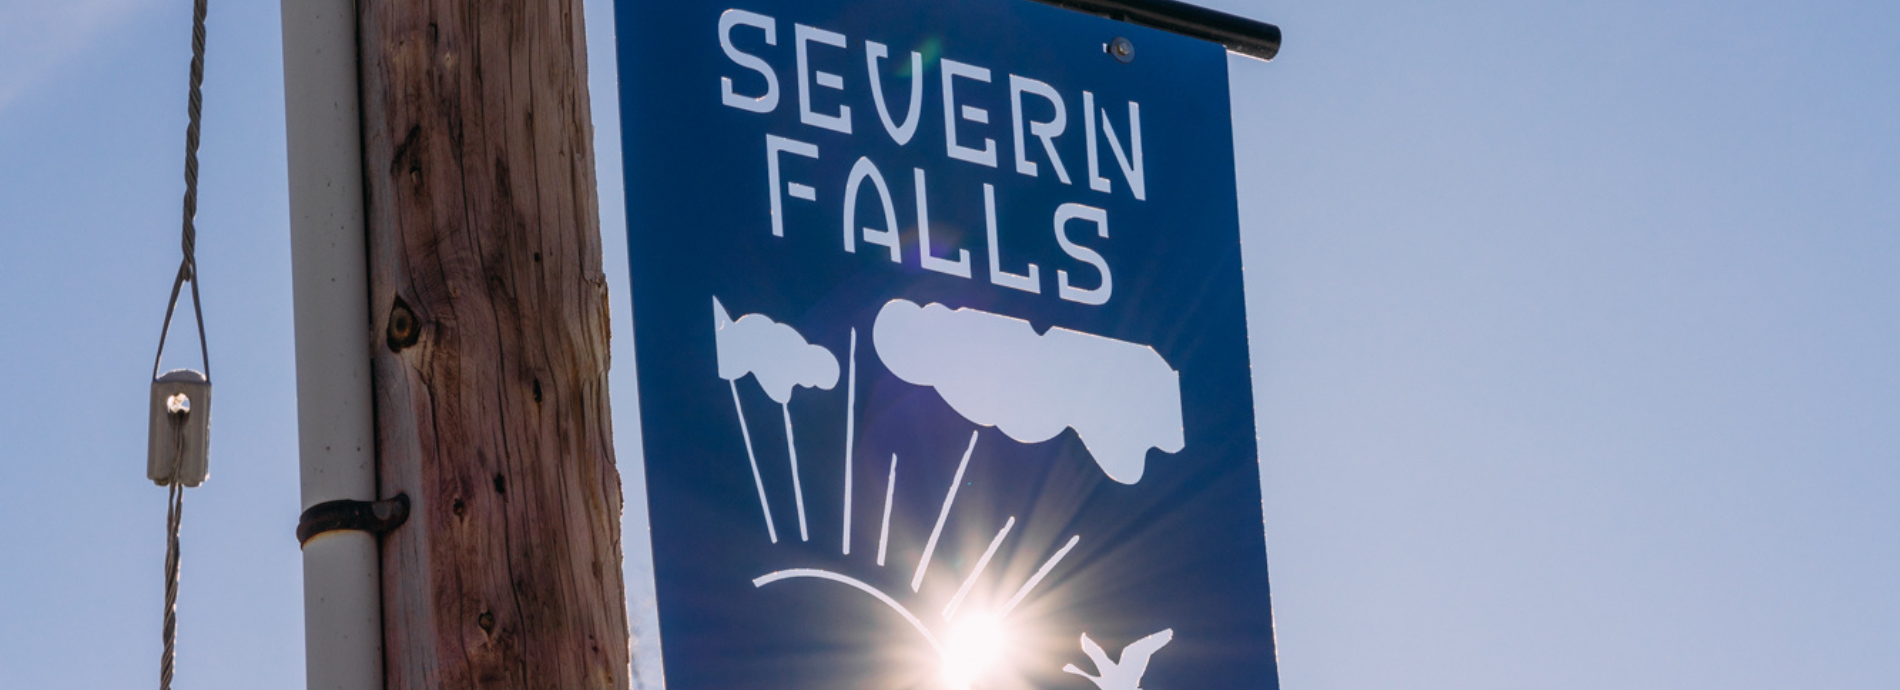 Severn Falls community welcome banner